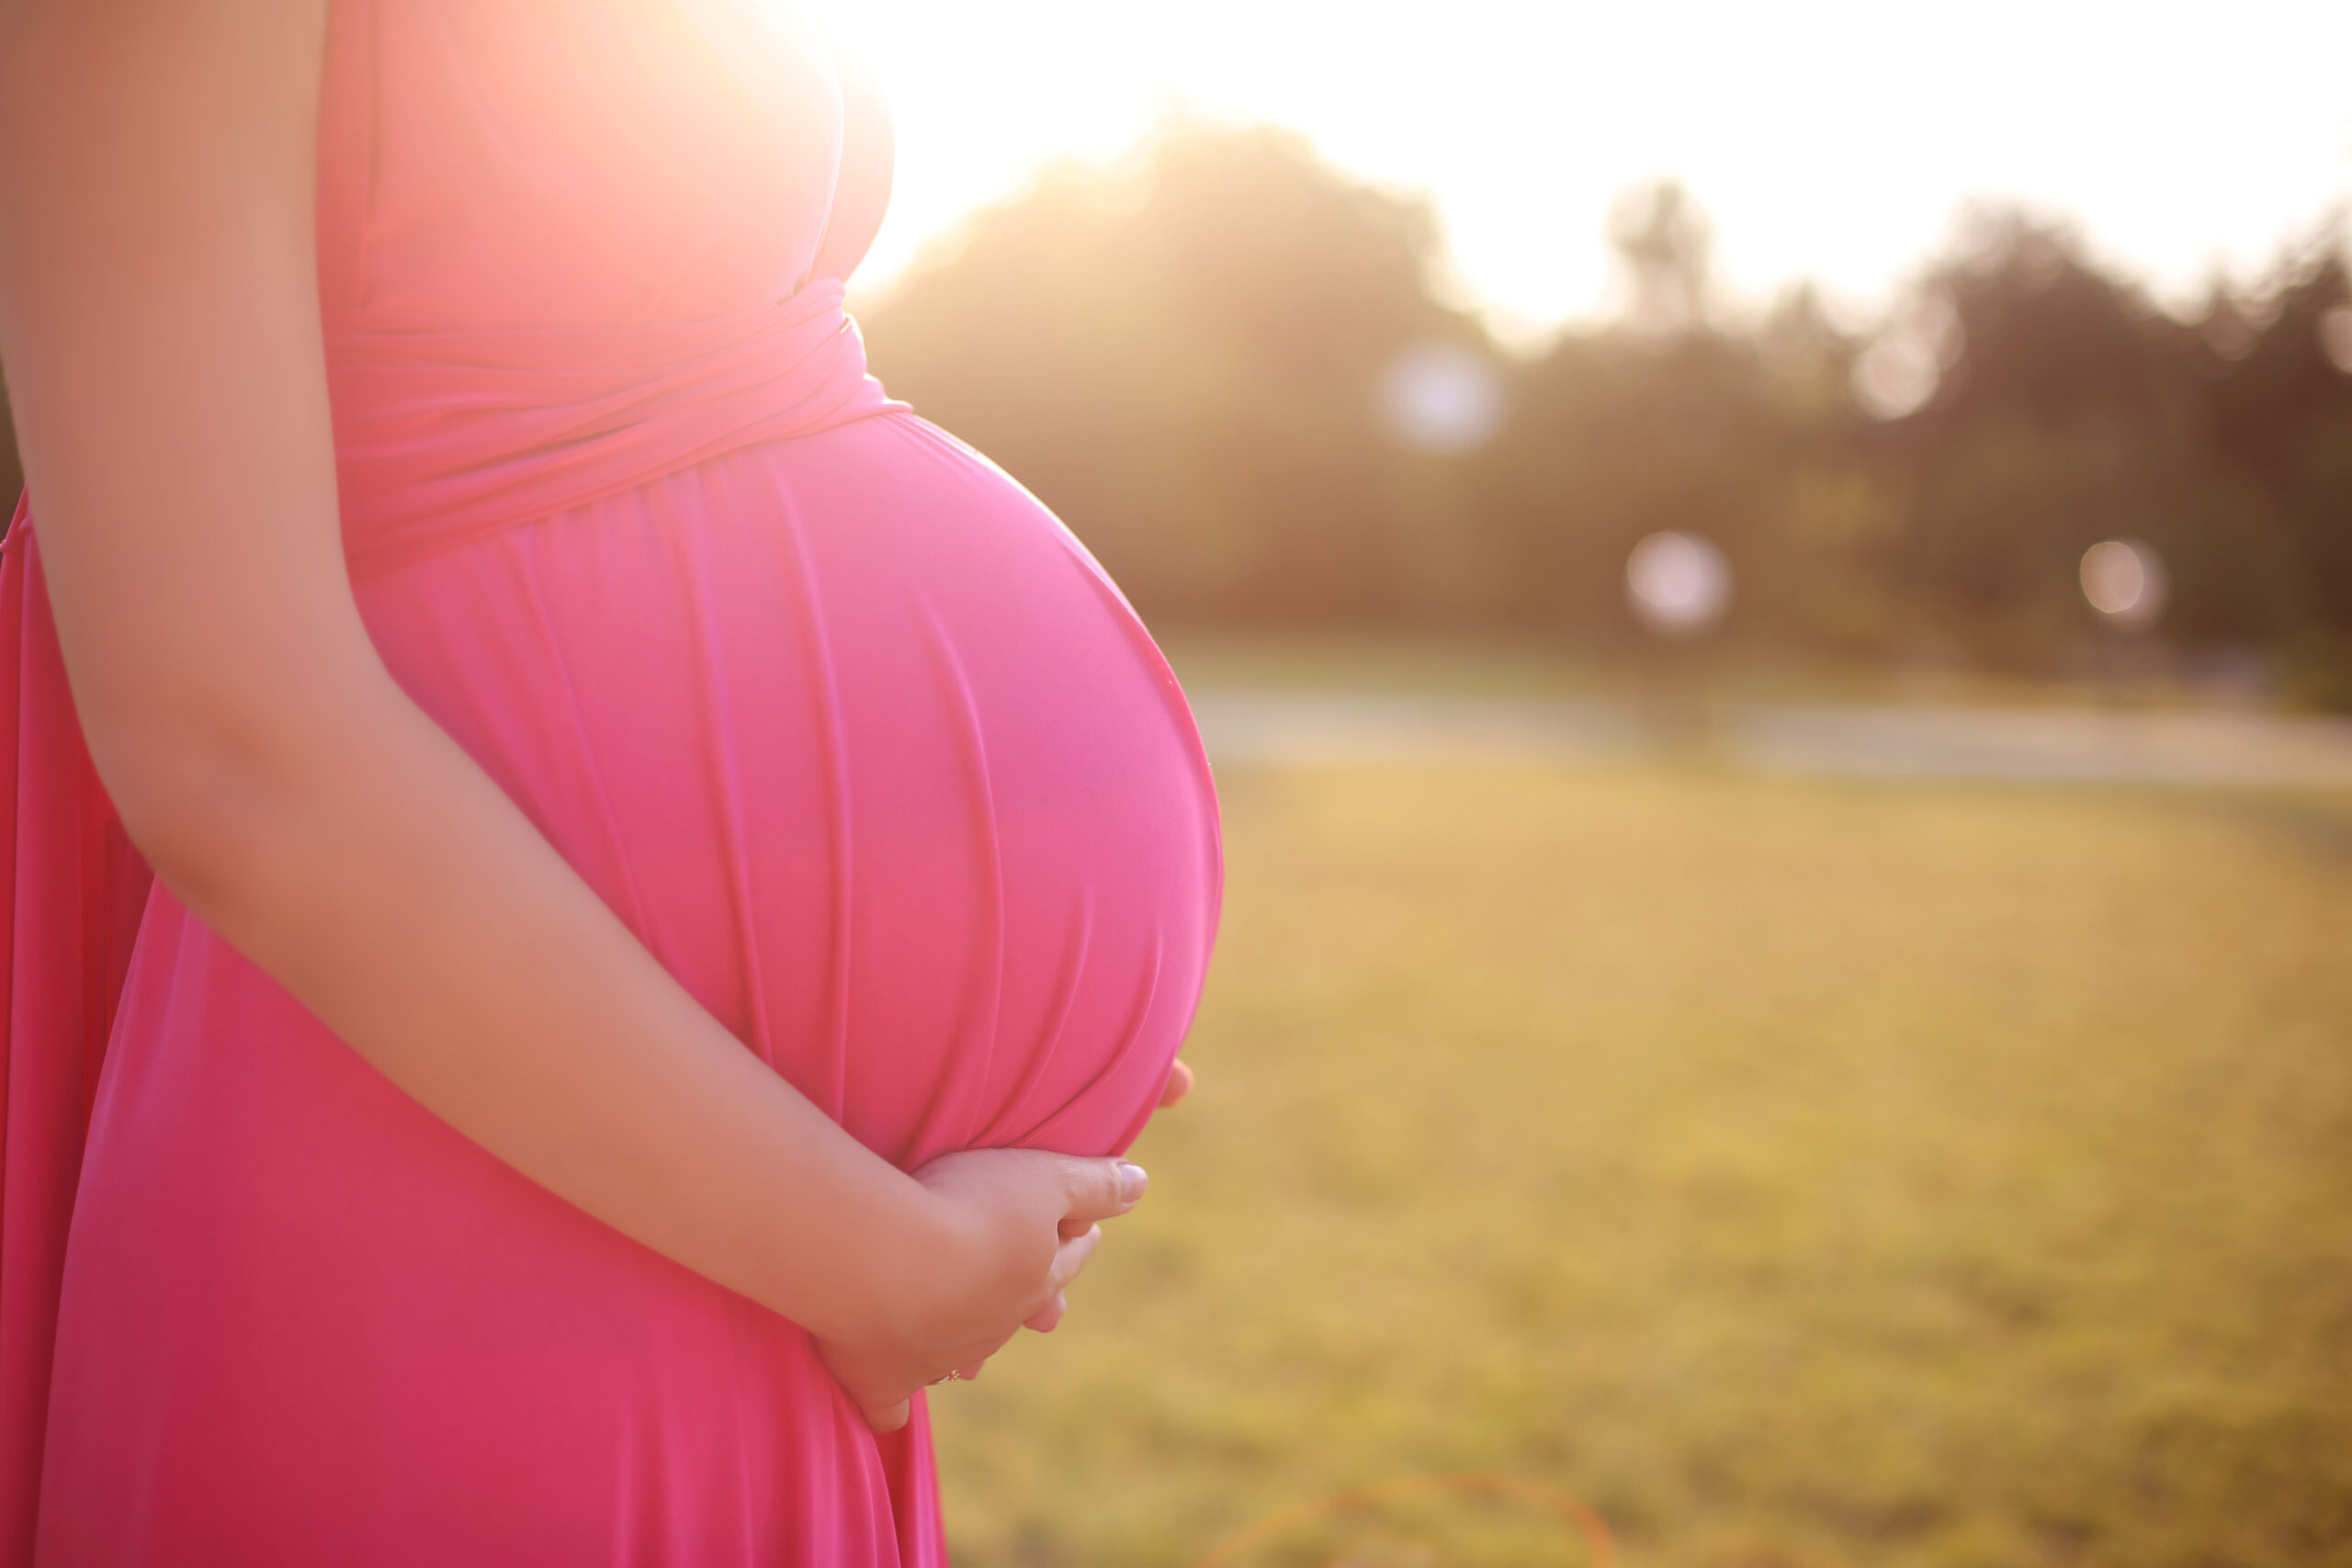 Heat Exposure Linked with Poor Outcomes for Pregnant People